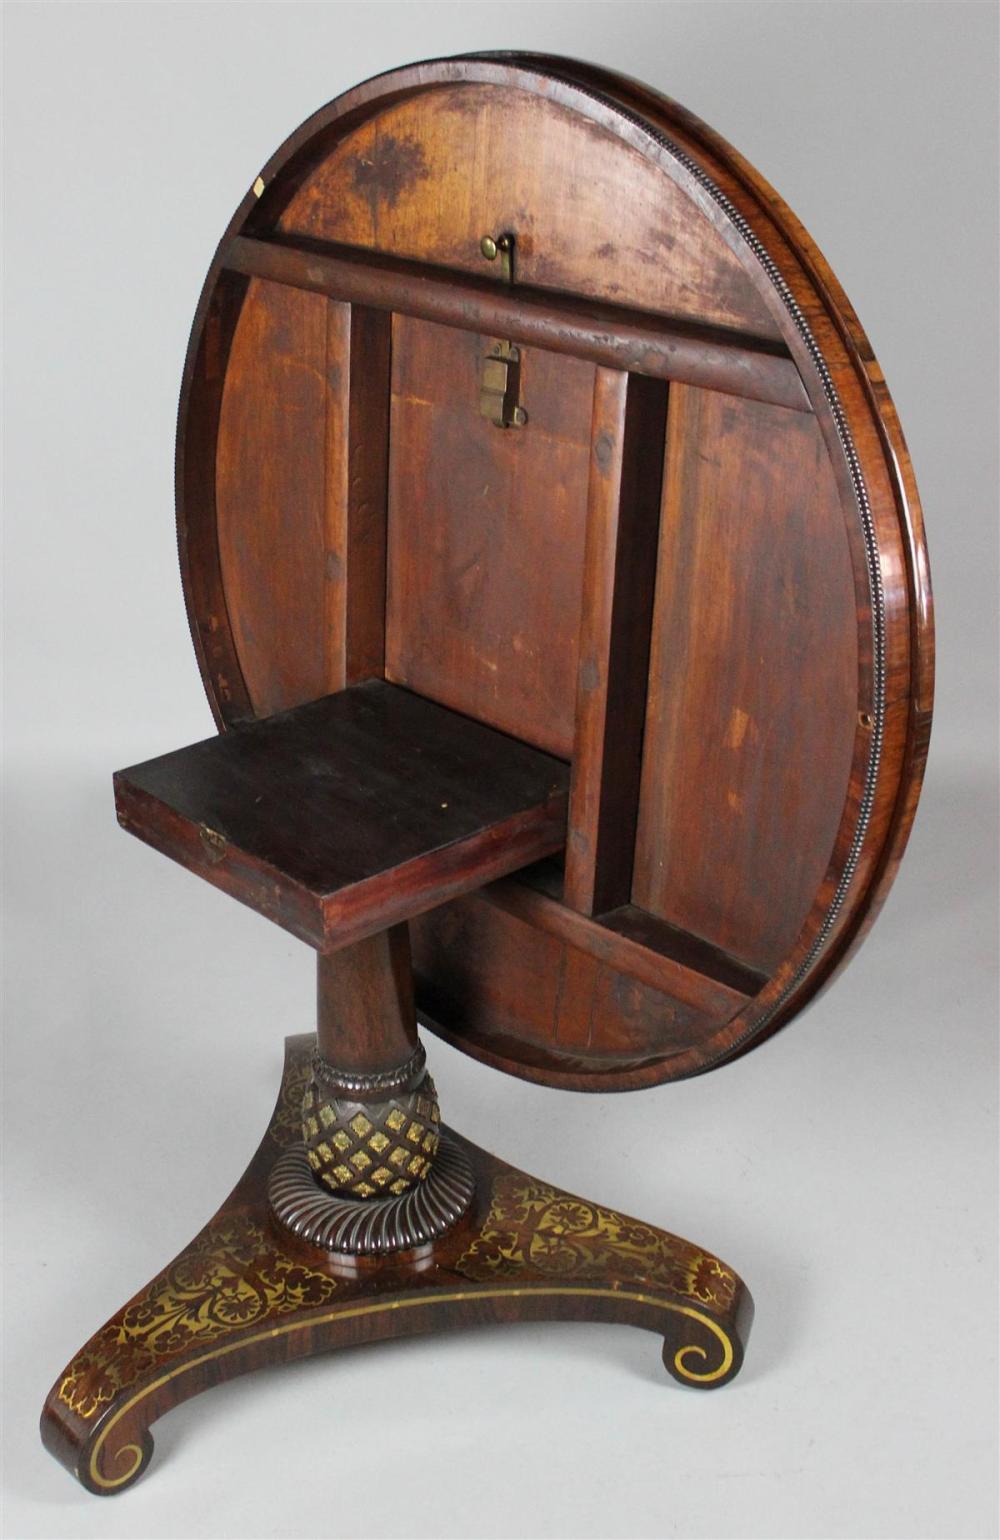 English Regency Period Rosewood and Brass Tilt-Top Table In Good Condition For Sale In New York, NY